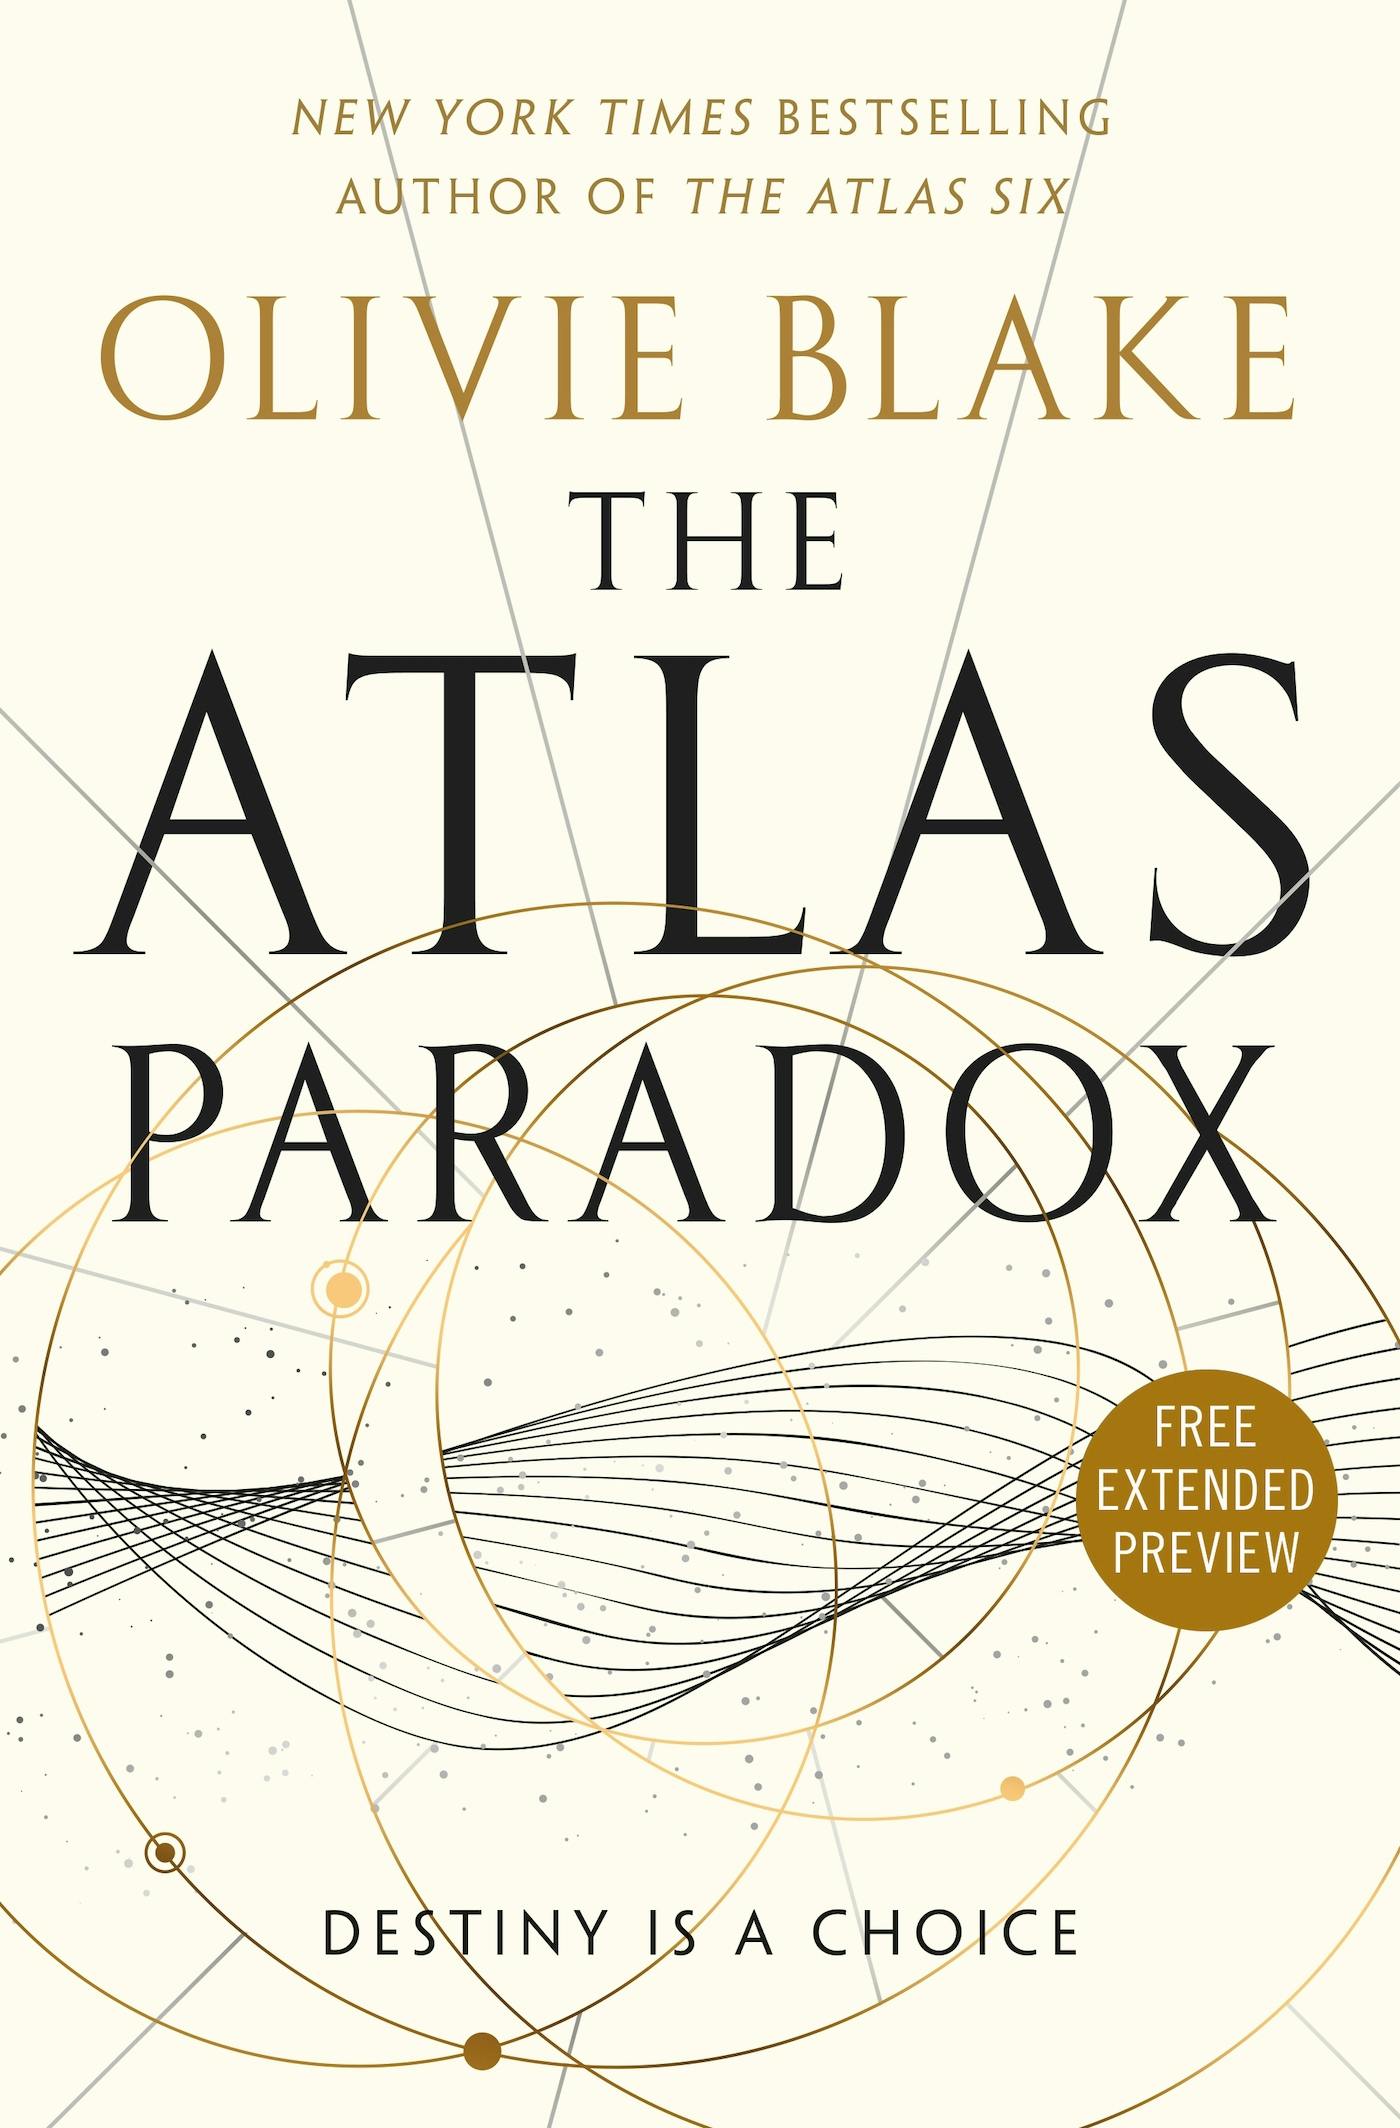 Cover for the book titled as: The Atlas Paradox Sneak Peek